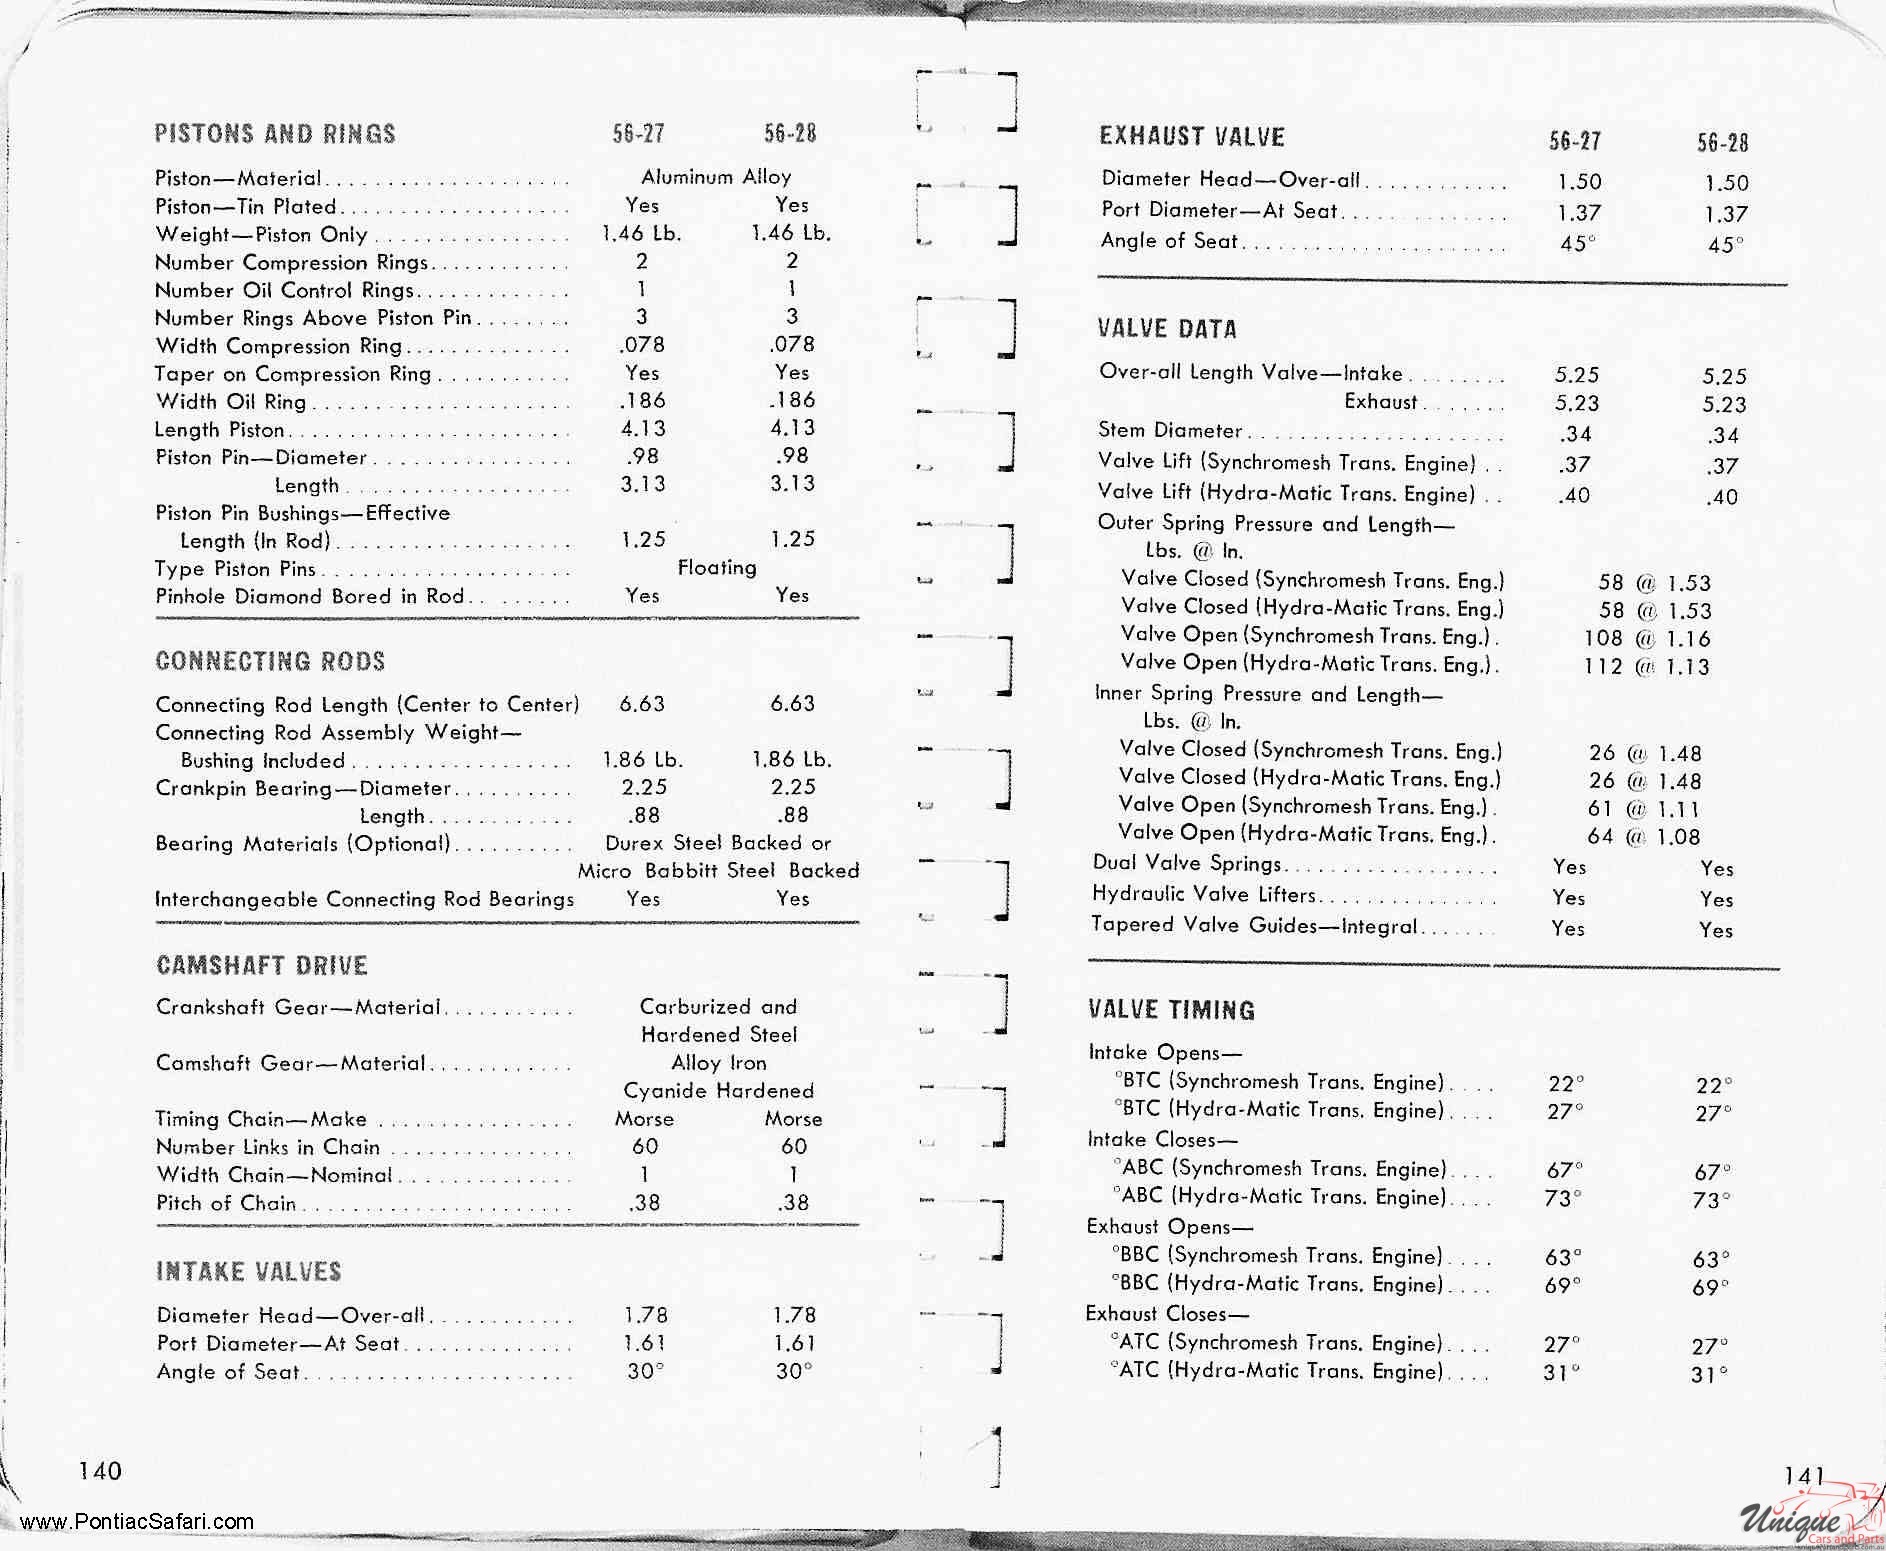 1956 Pontiac Facts Book Page 129